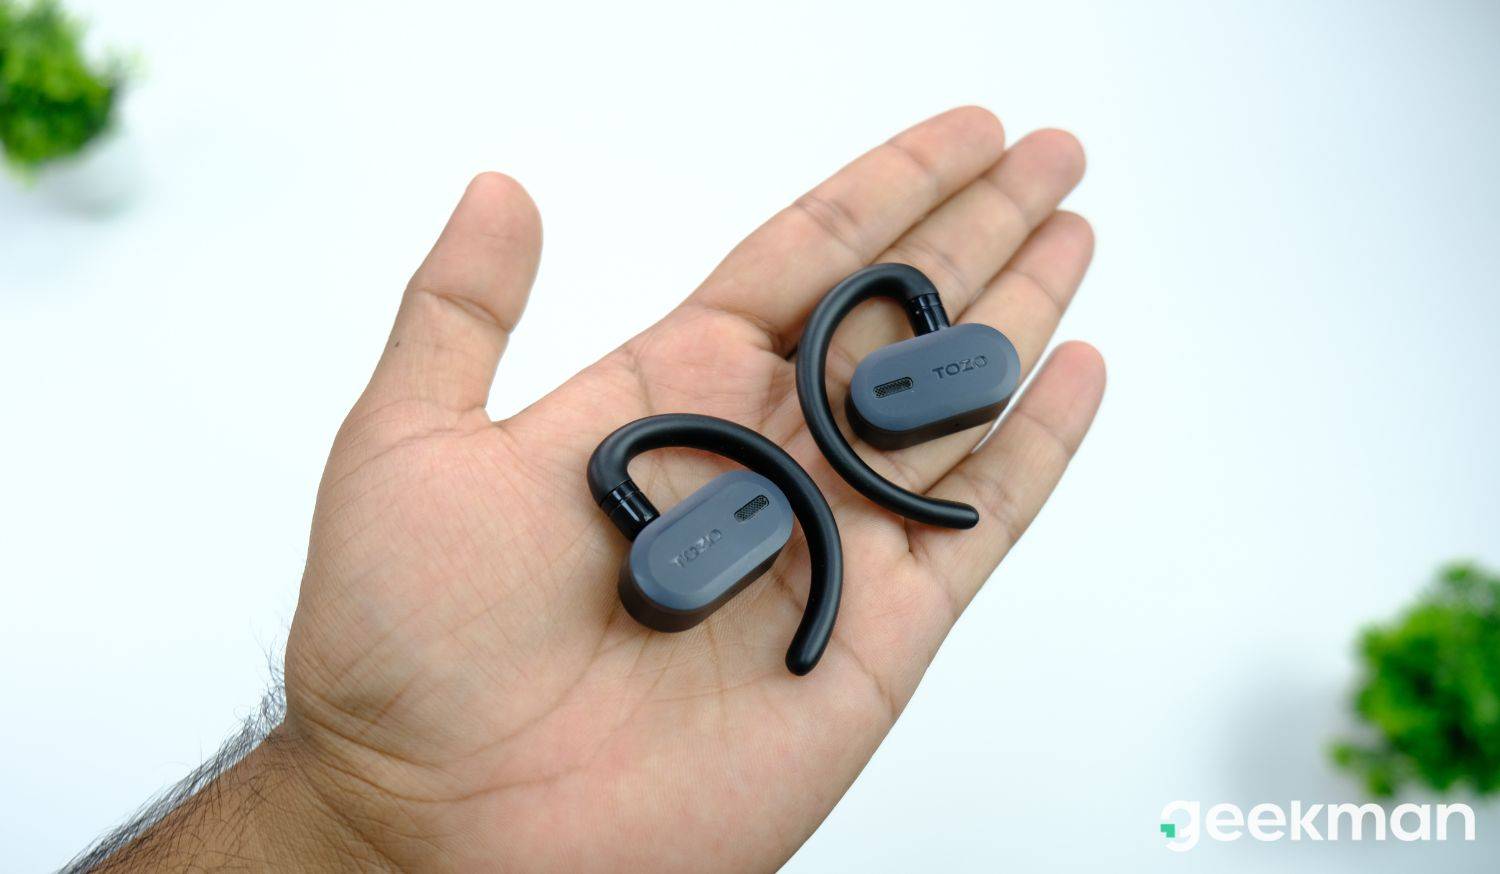 Tozo Open Buds earbuds design